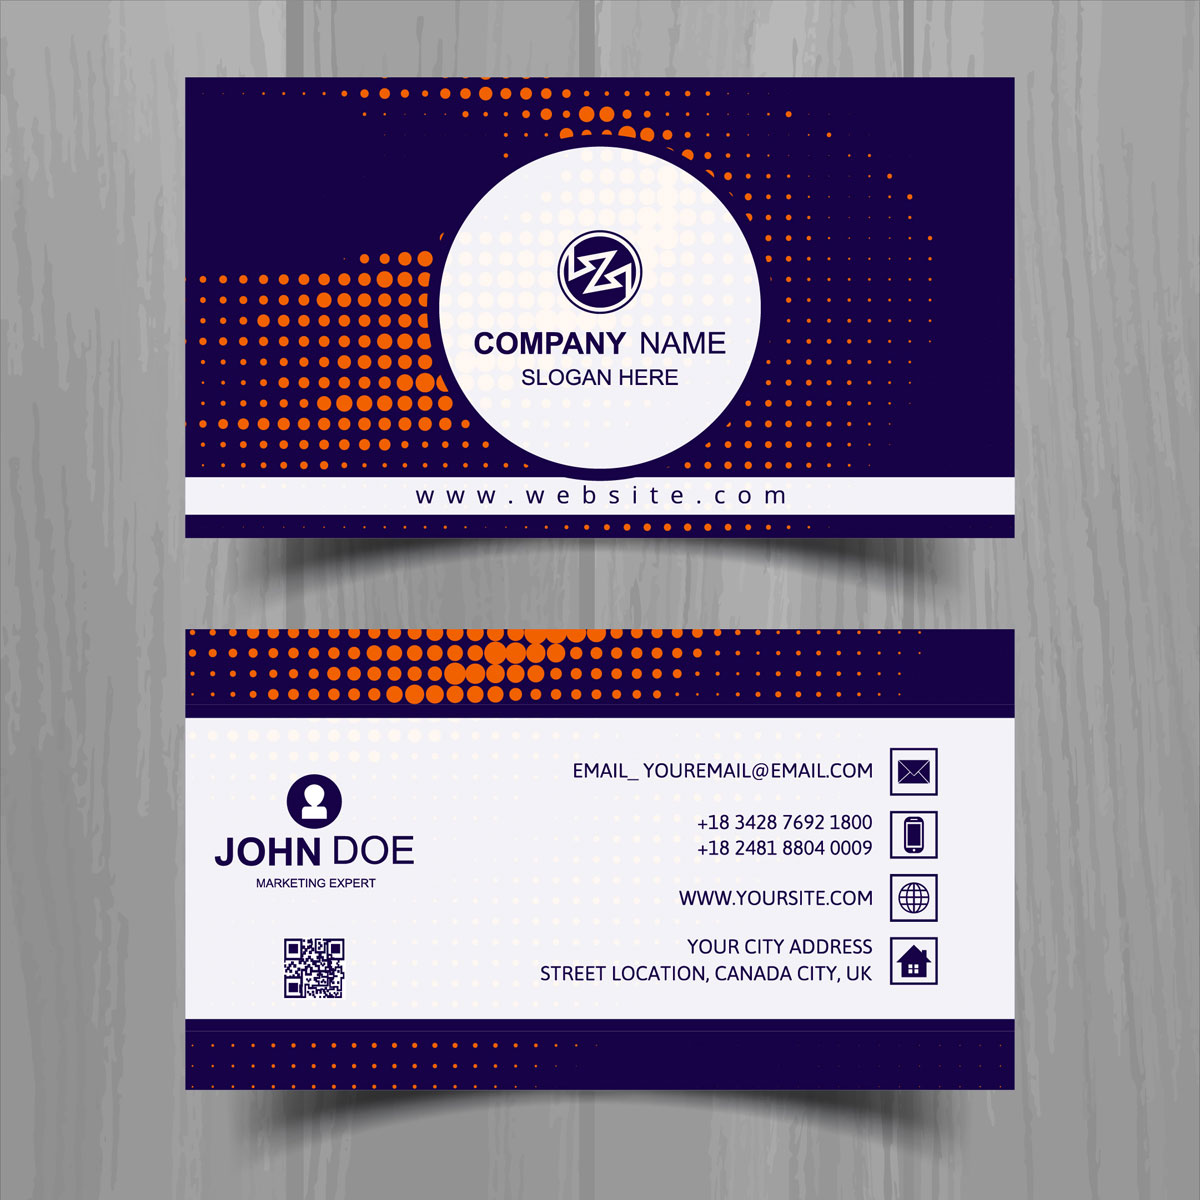 Elevate Your Networking: The Comprehensive Guide to E-Business Cards